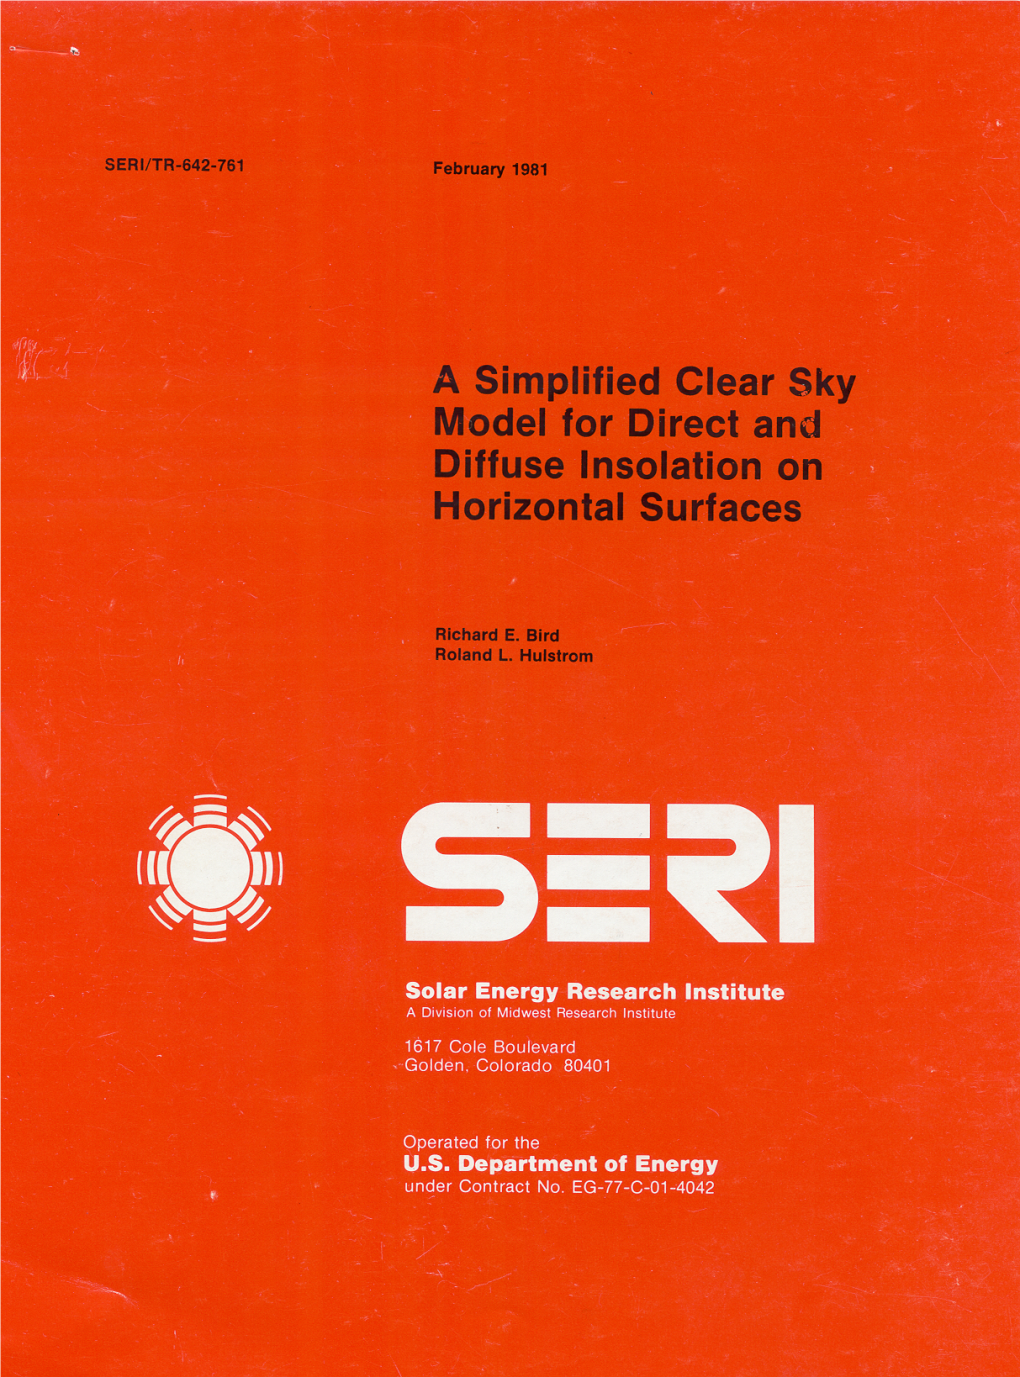 A Simplified Clear Sky Model for Direct and Diffuse Insolation on Horizontal Surfaces